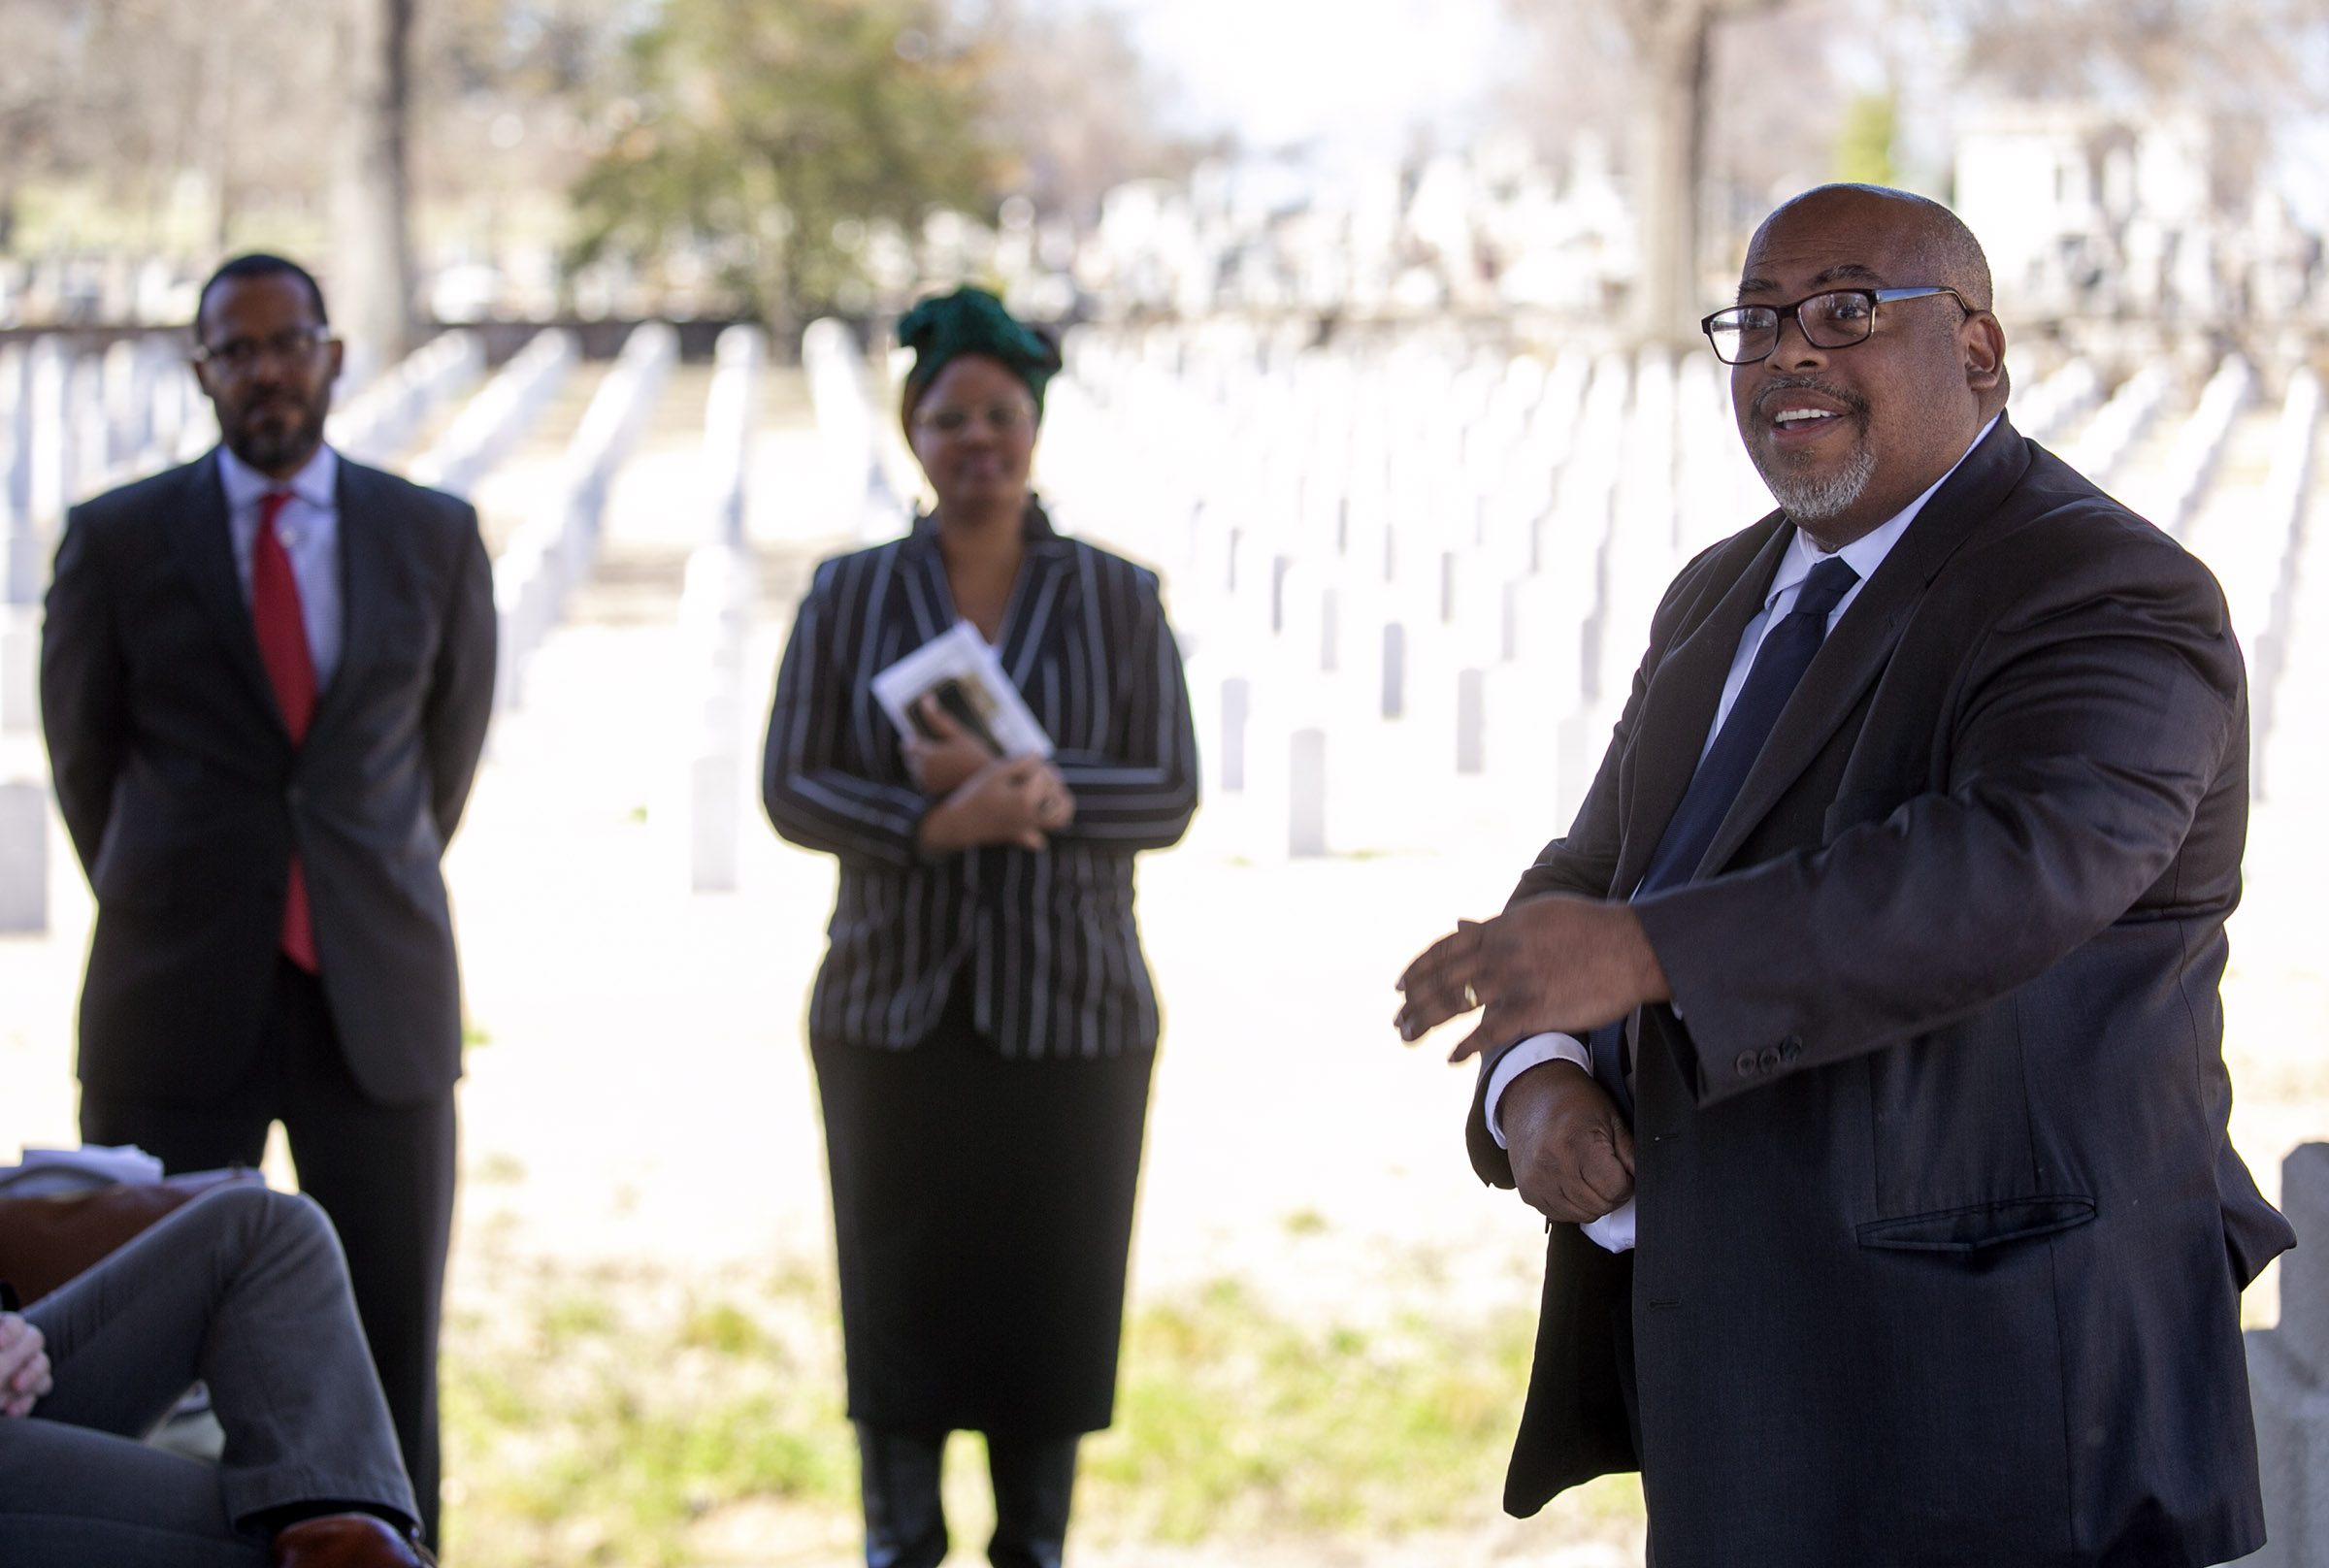 Brian Mitchell, middle, talks about the significance of an historic marker for Frank Moore, a member of the Elaine 12, placed March 6 in Little Rock National Cemetery. Photo by Ben Krain.